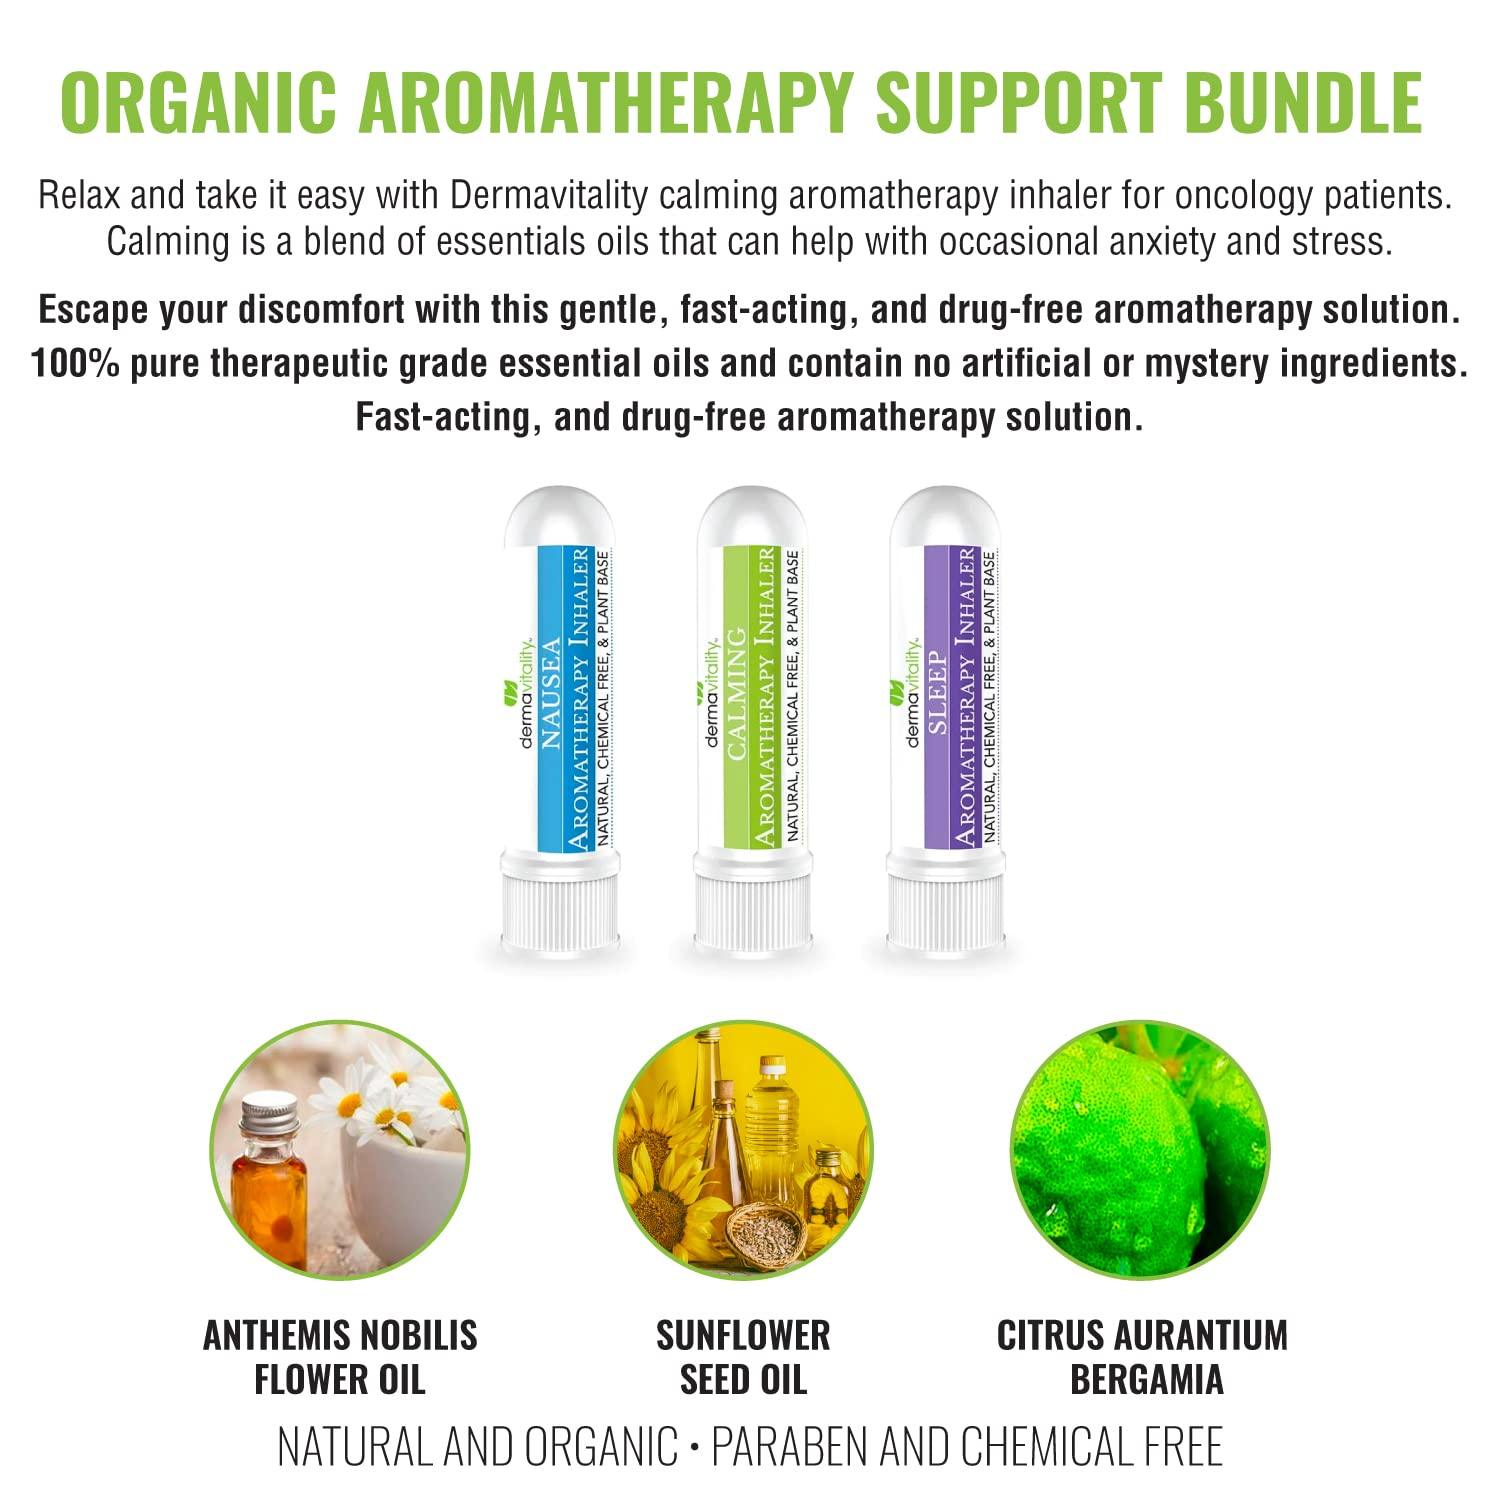 Aromatherapy Inhalers for Chemotherapy Patients - Dermavitality